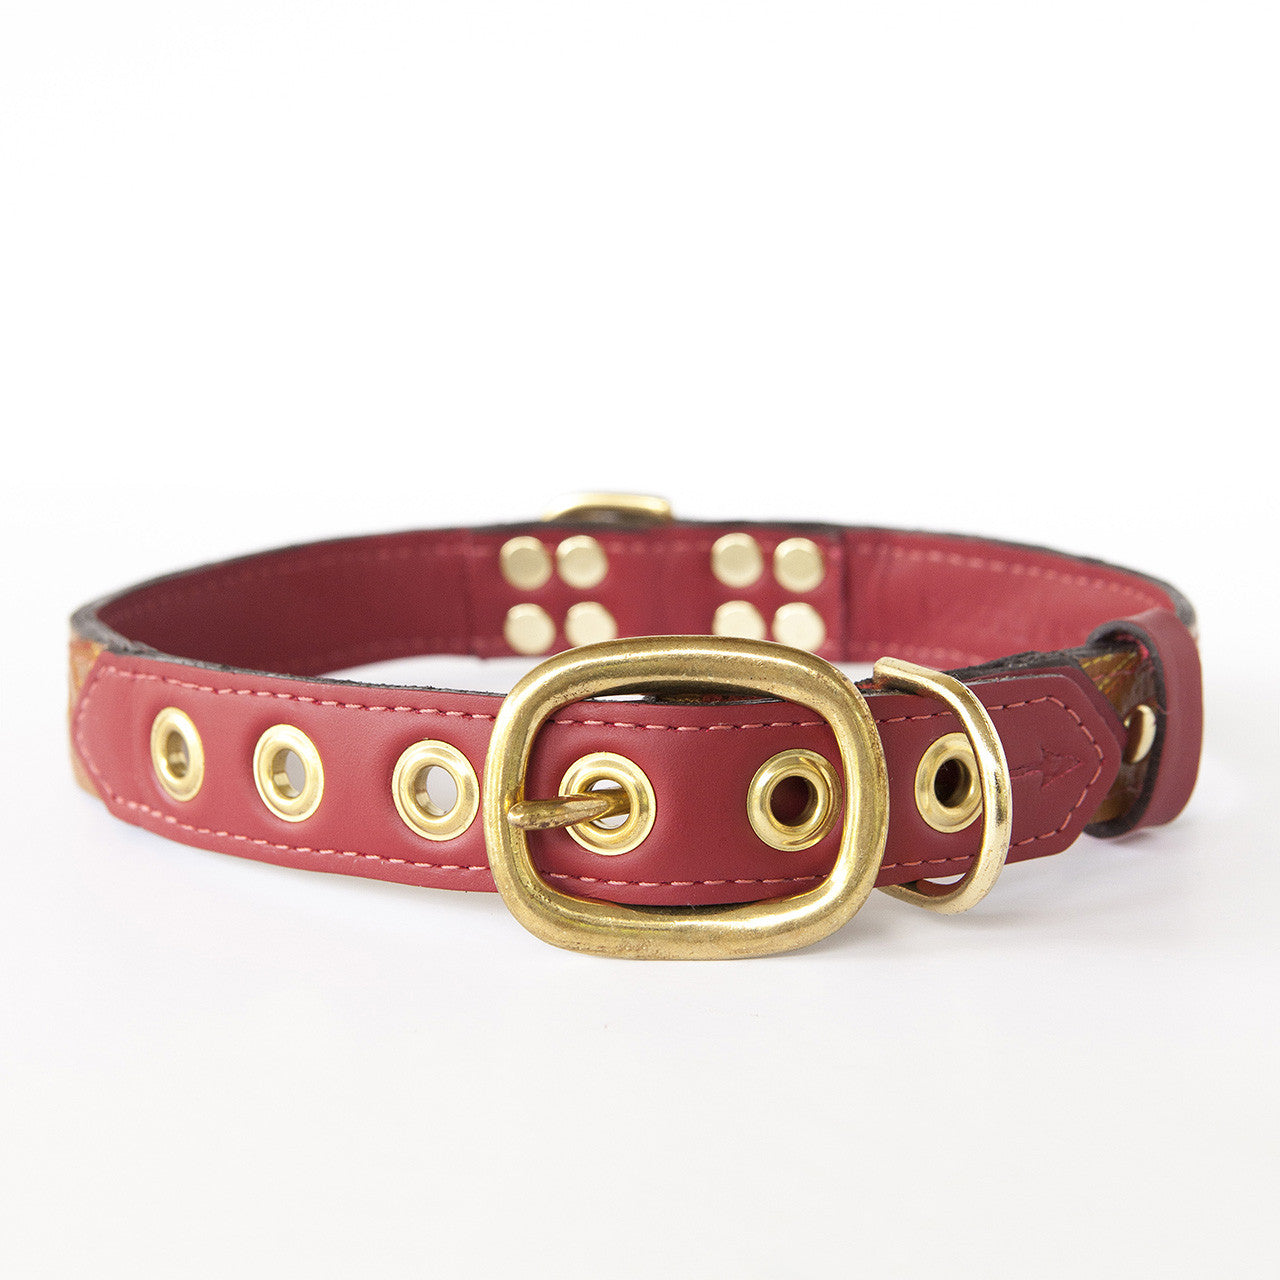 Ruby Red Dog Collar with Brown Leather + Multicolor Stitching (back view)